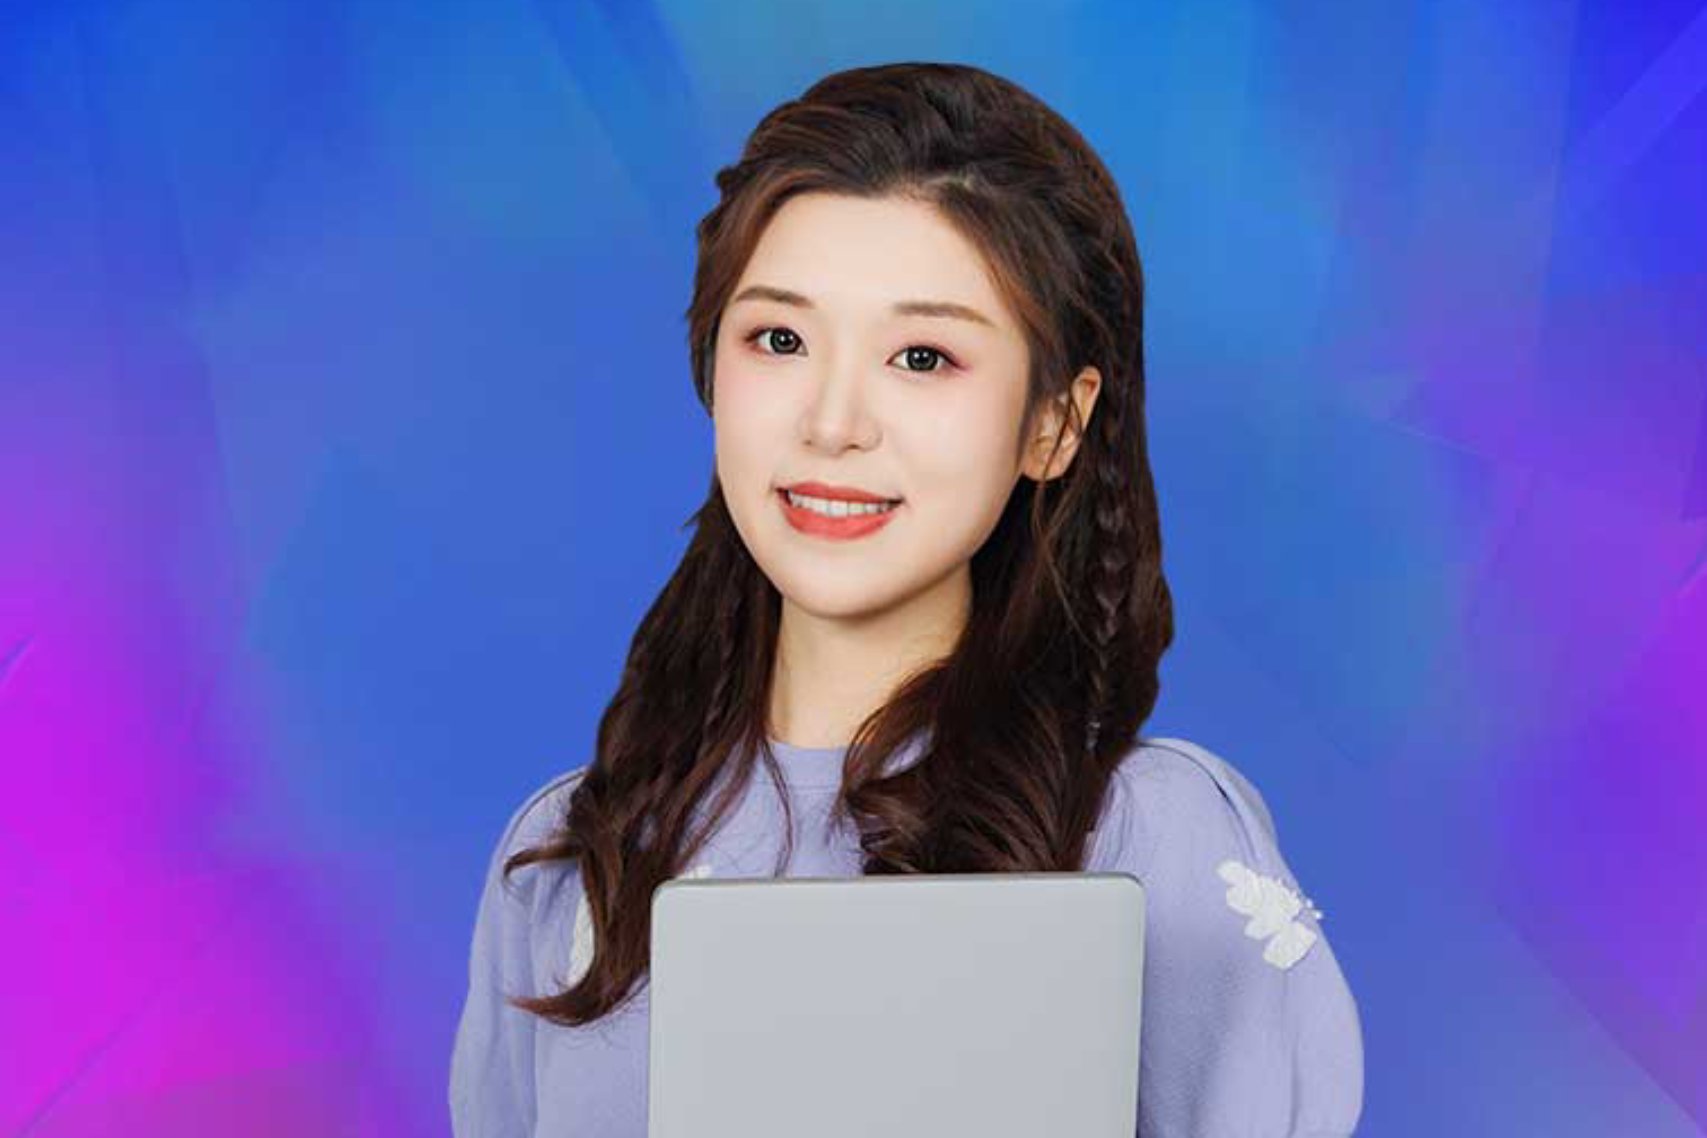 Young girl smiling while holding her laptop